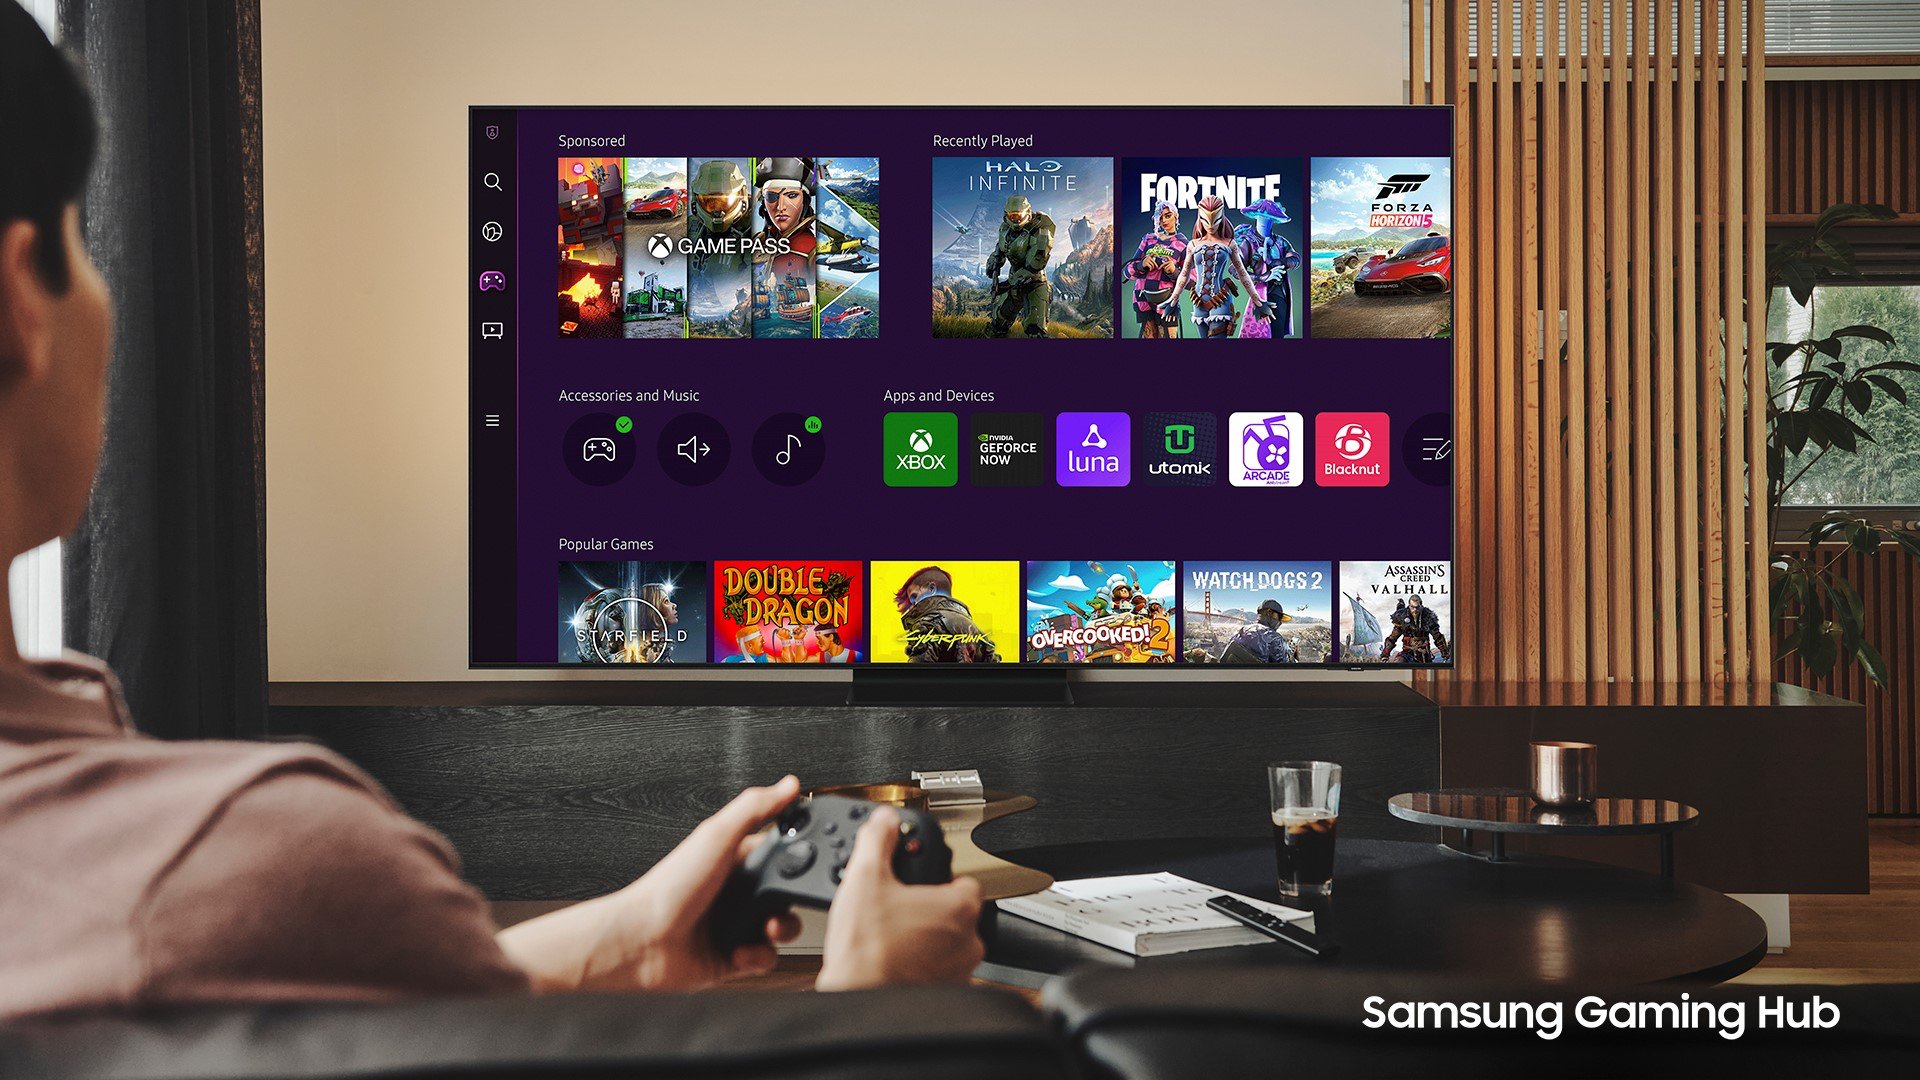 Neo QLED: Stream Xbox games directly on TV, Samsung, Halo Infinite, Sea  of Thieves, video game console